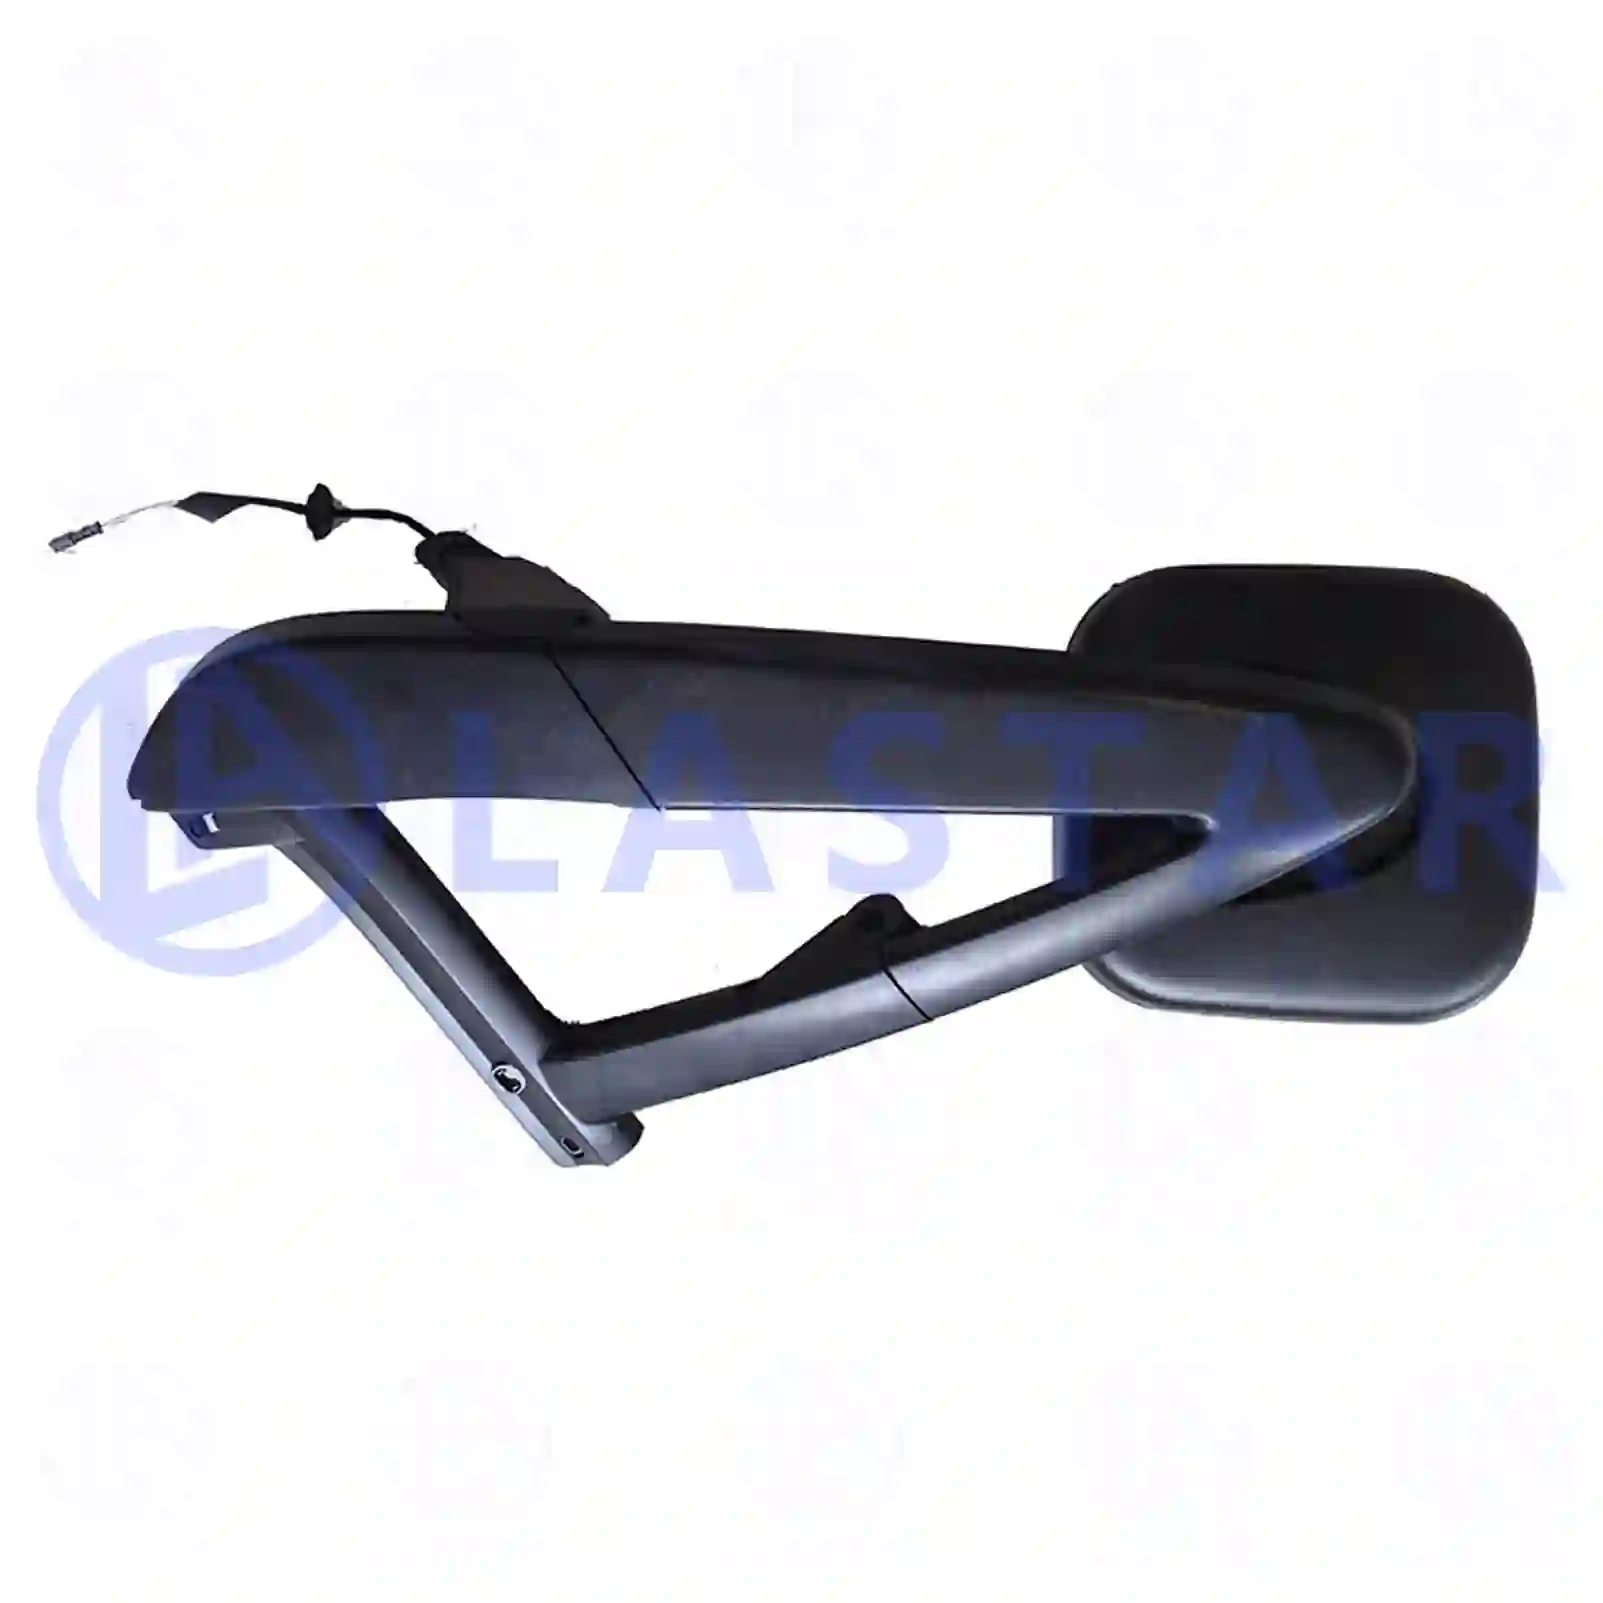  Front mirror, with cover || Lastar Spare Part | Truck Spare Parts, Auotomotive Spare Parts